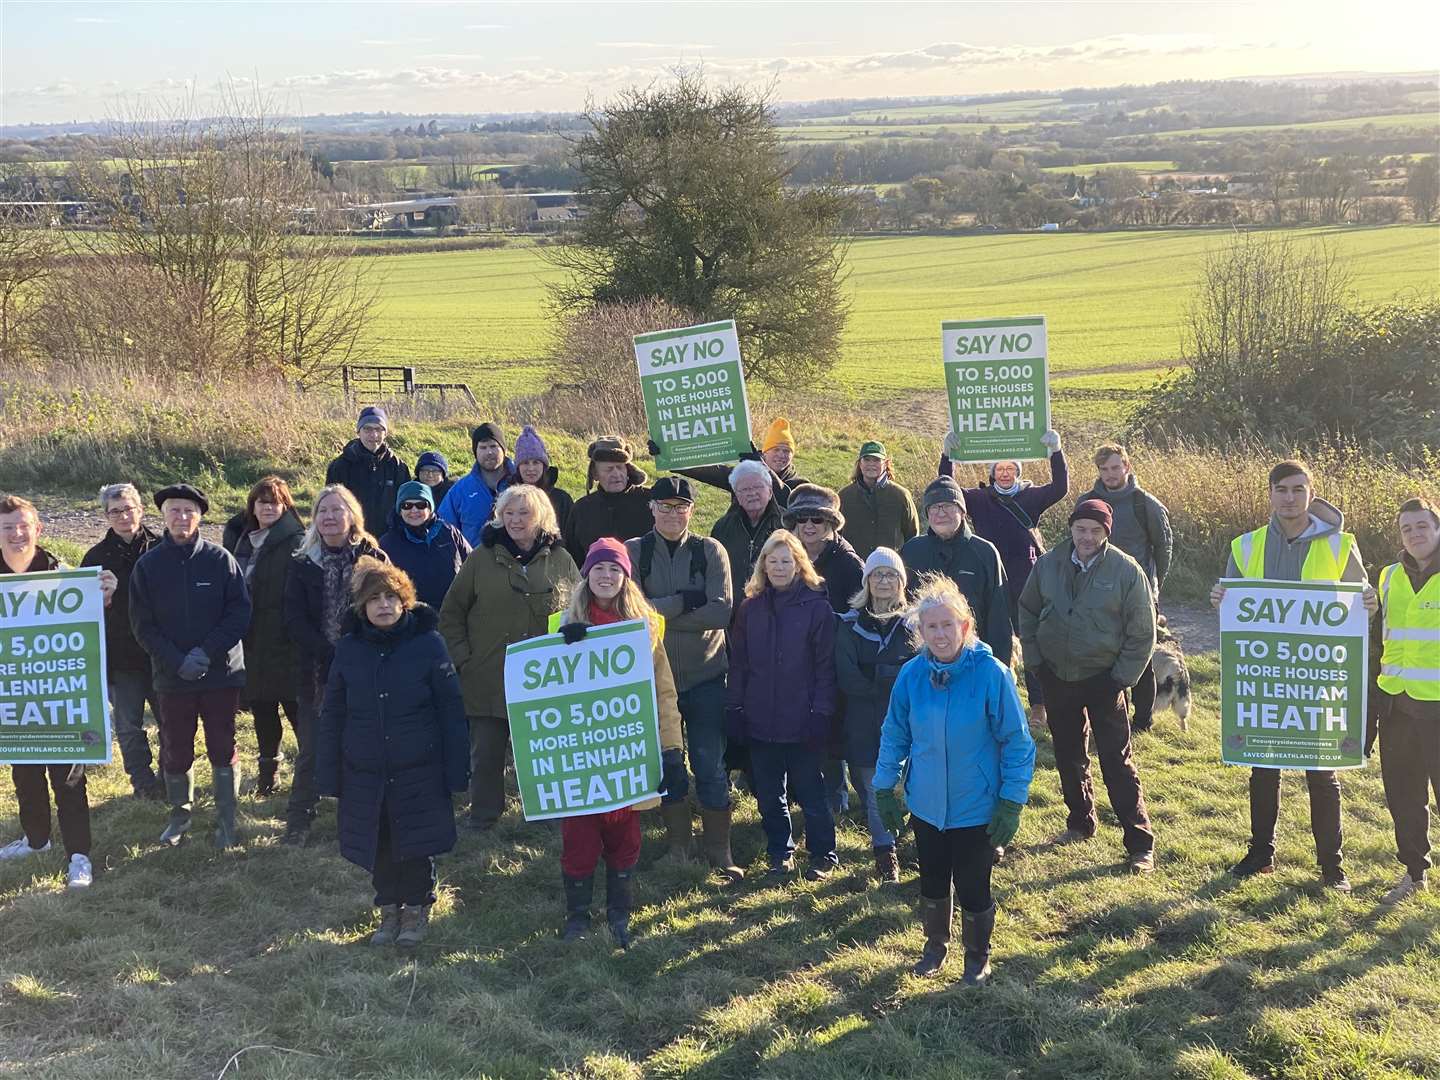 Protesters want the Heathlands scheme scrapped